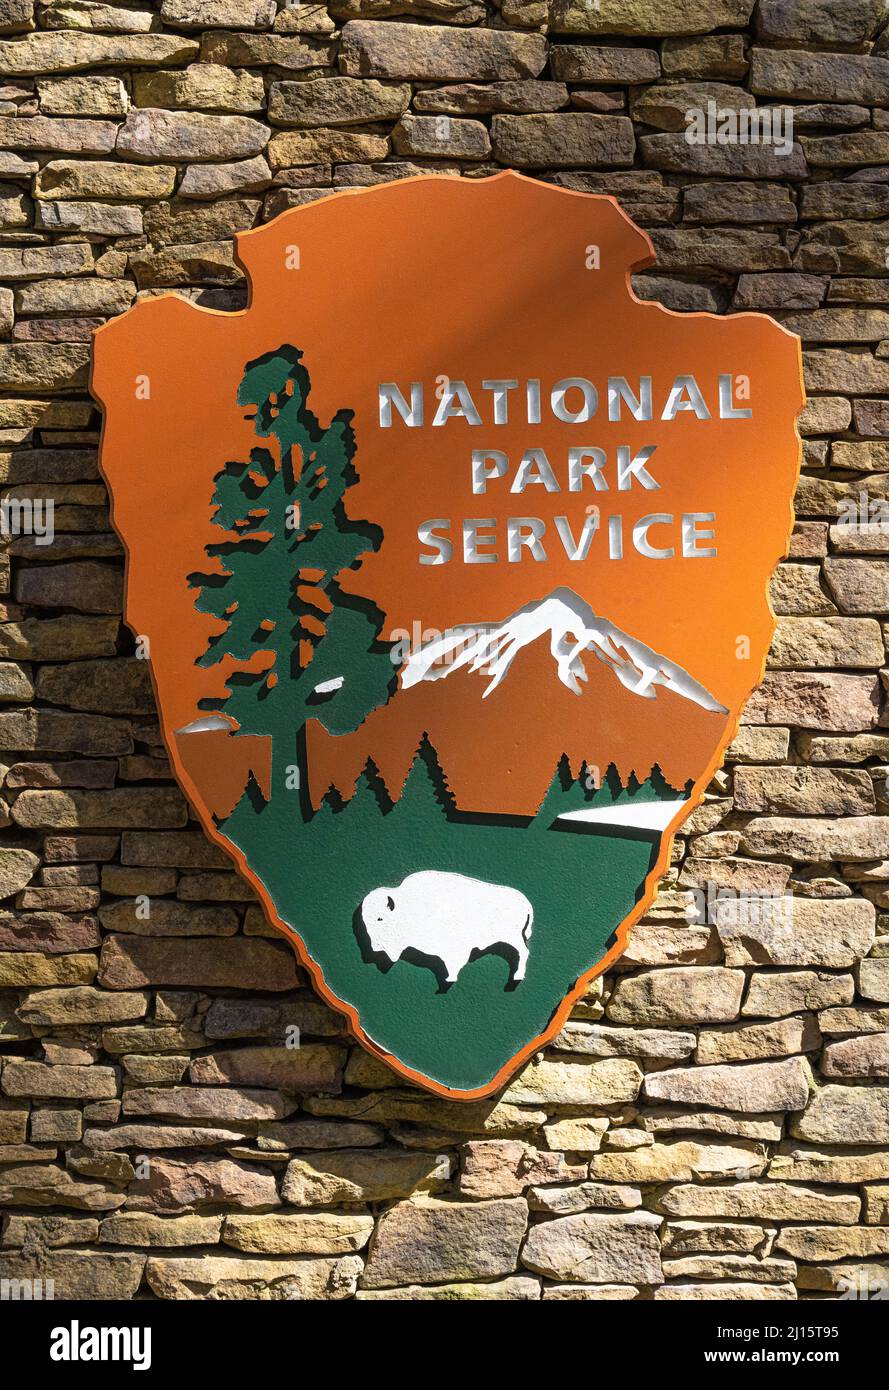 National Park Service logo signage at Sope Creek in the Cochran Shoals Unit of the Chattahoochee River National Recreation Area in Marietta, Georgia. Stock Photo